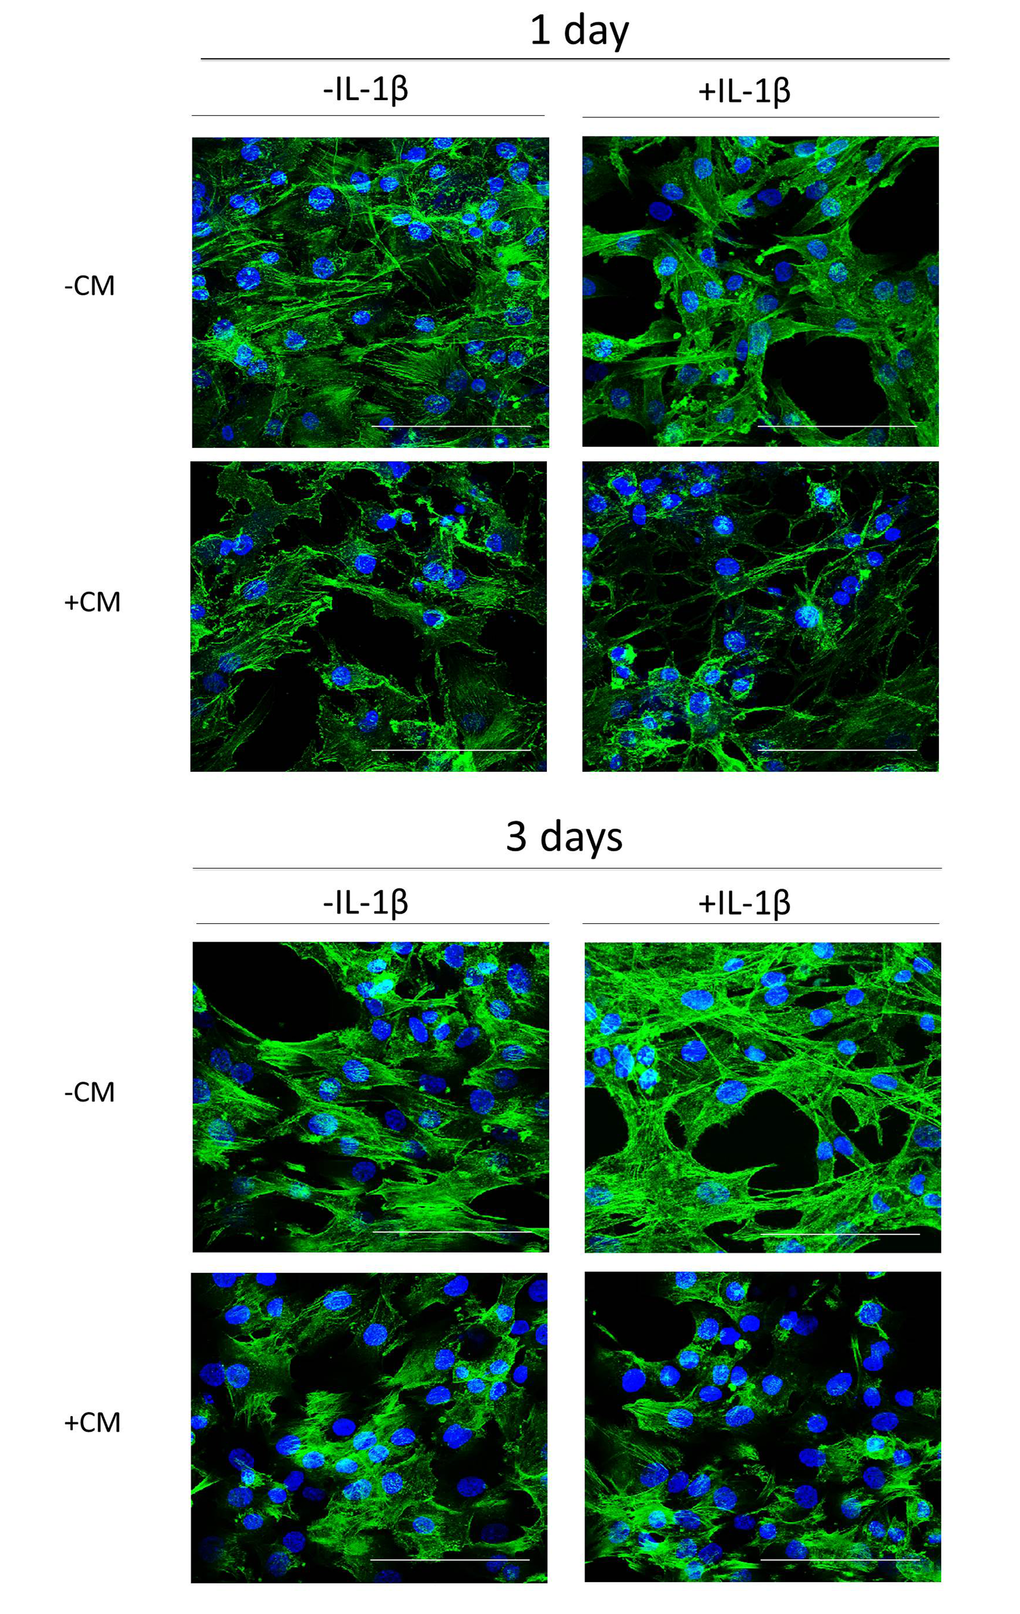 Actin stress fibers formation induced by IL-1β in OA chondrocytes and effect of CM. Presence of actin stress fibers (green pixels) in a representative experiment of N=4 separate experiments with cells from separate donors. DAPI was used to stain the nuclei. Bars: 50 μm. OA chondrocytes were incubated with IL-1β and/or CM for 1 day and 3 days.